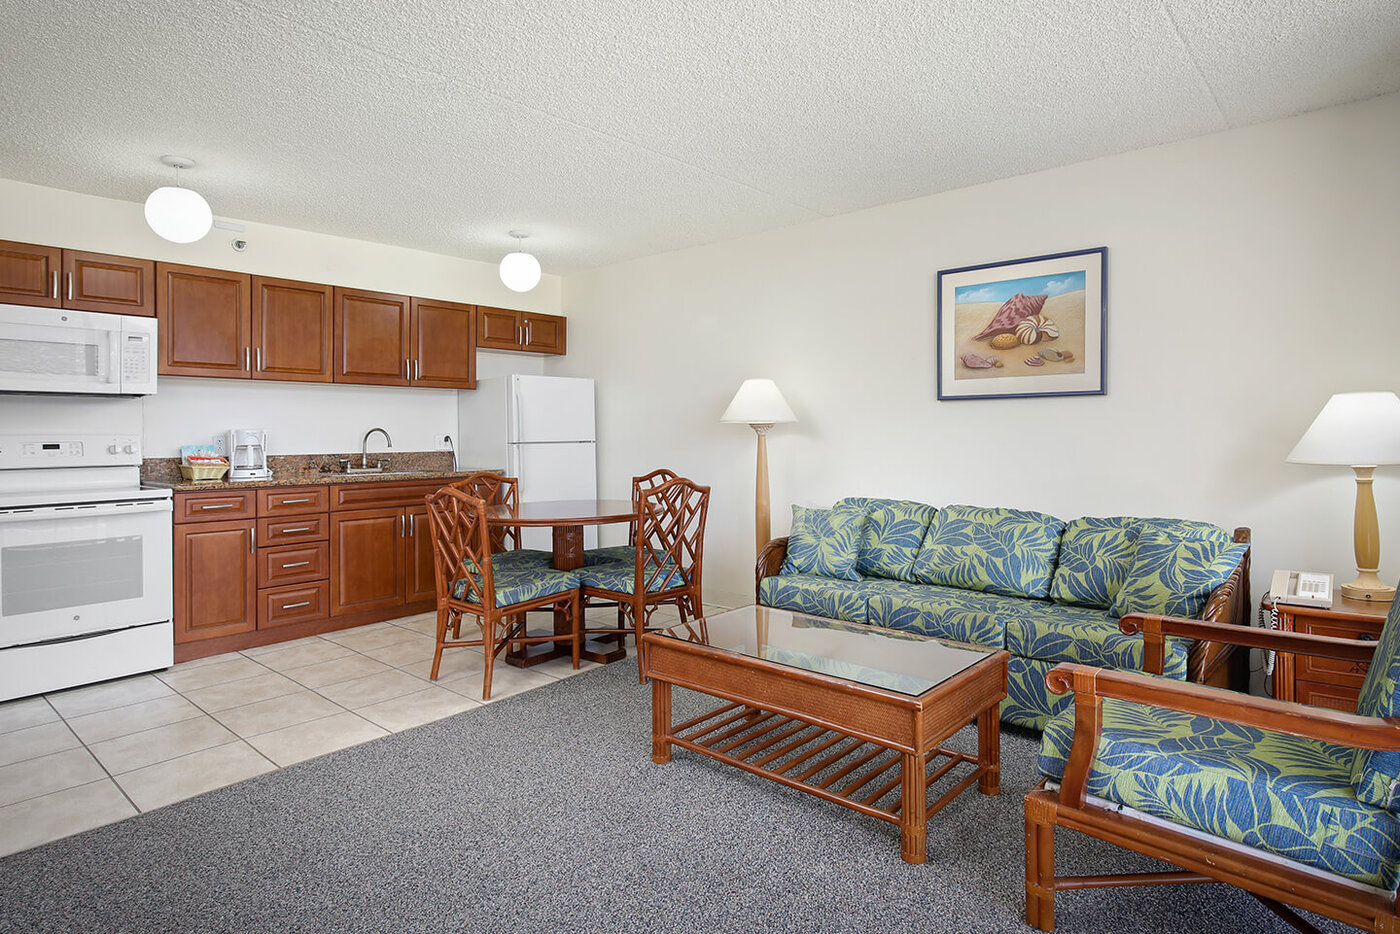 1-Bedroom Deluxe Mountain View living area with sofa, a fully equipped kitchen, and dining area.